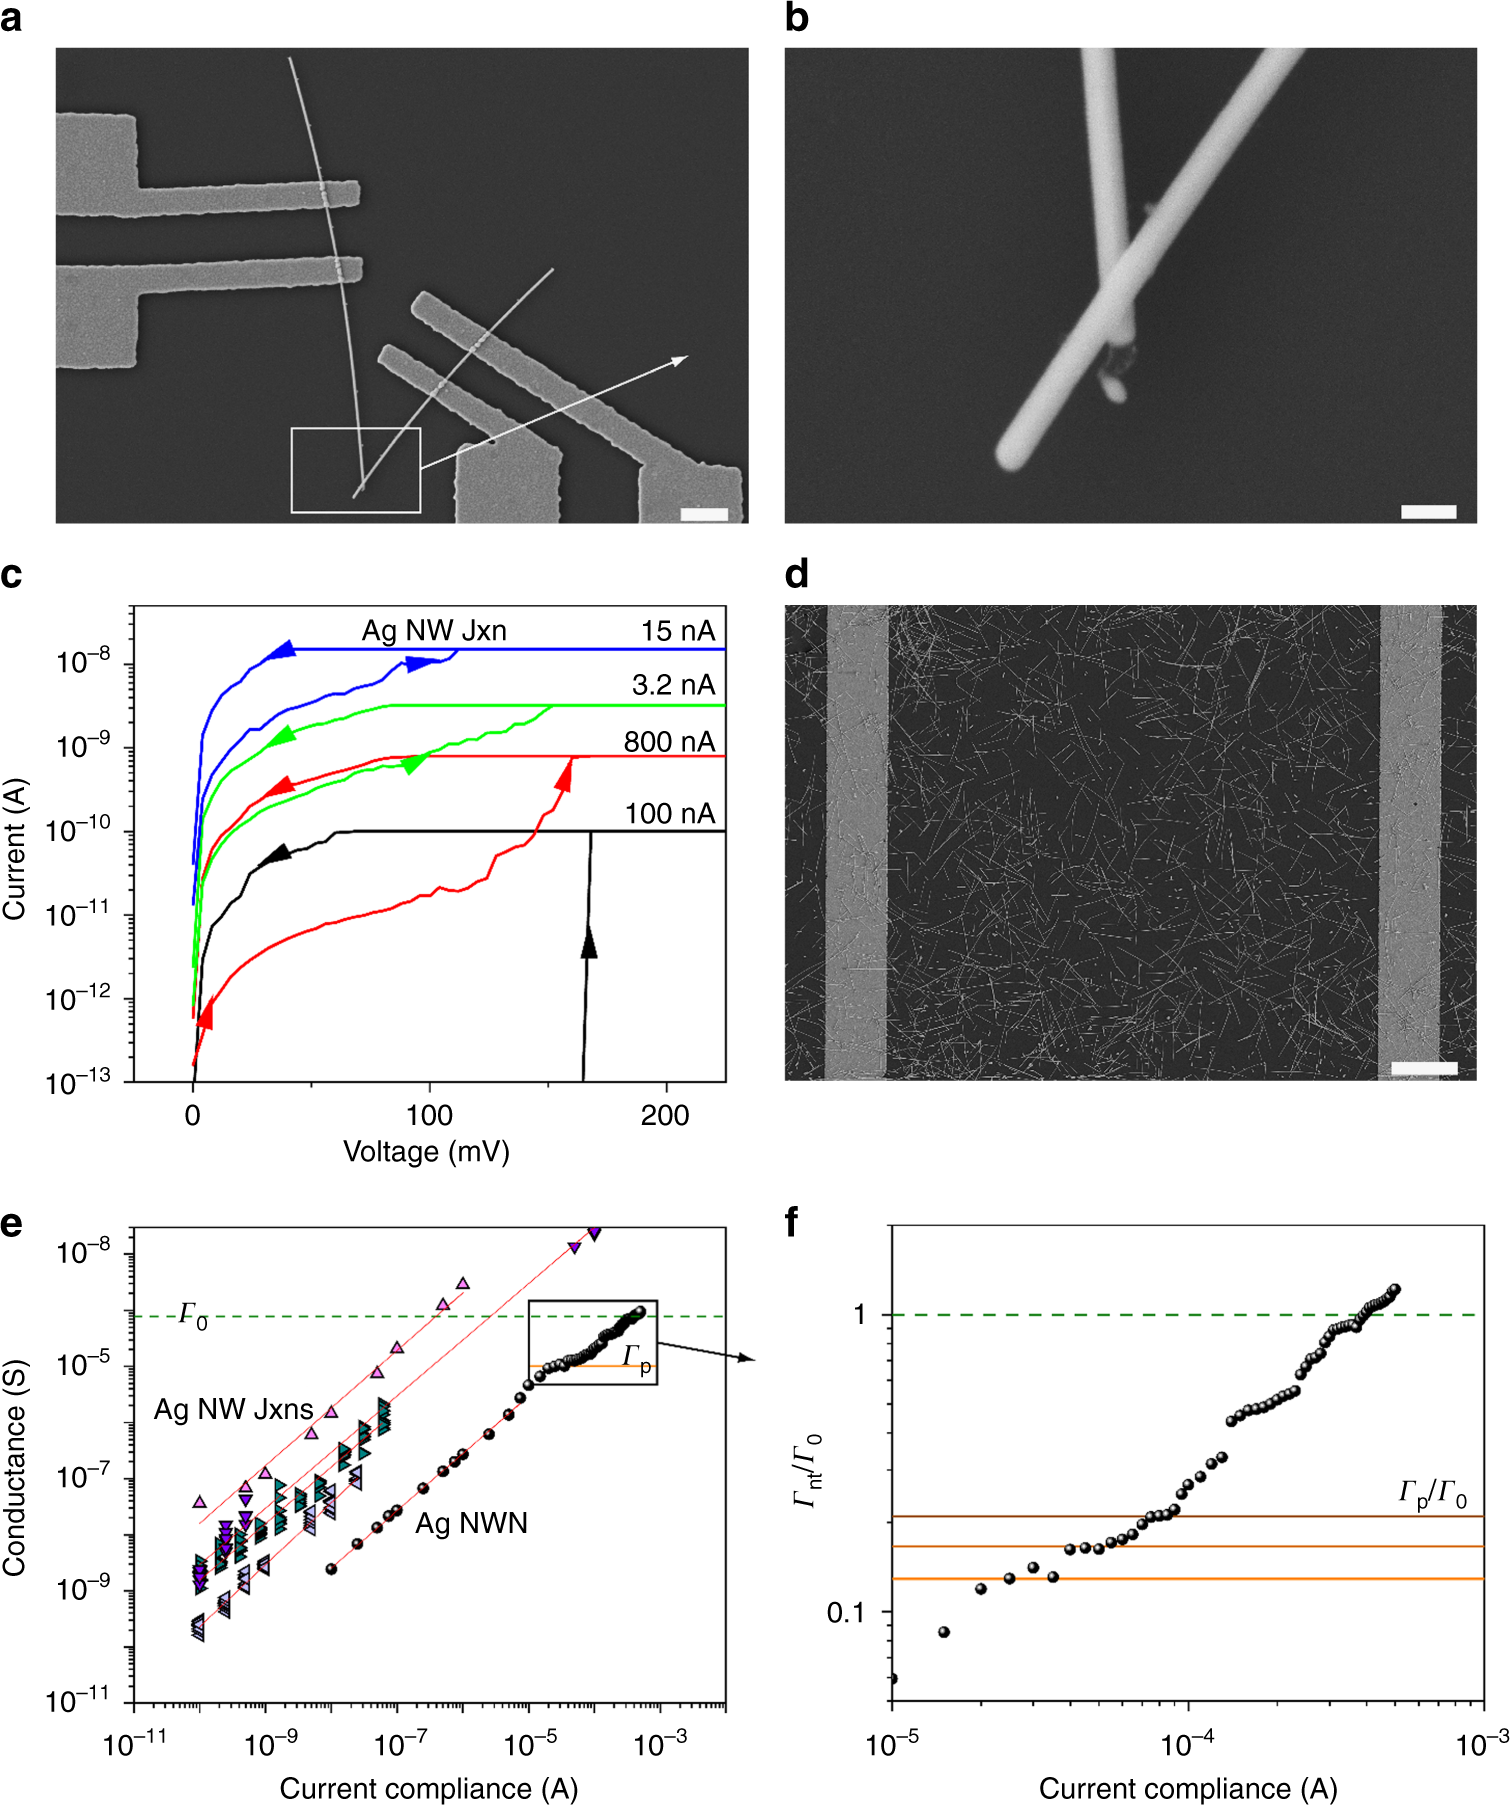 Full article: Molecular dynamics simulation of laser-induced  interconnections of silver nanowires